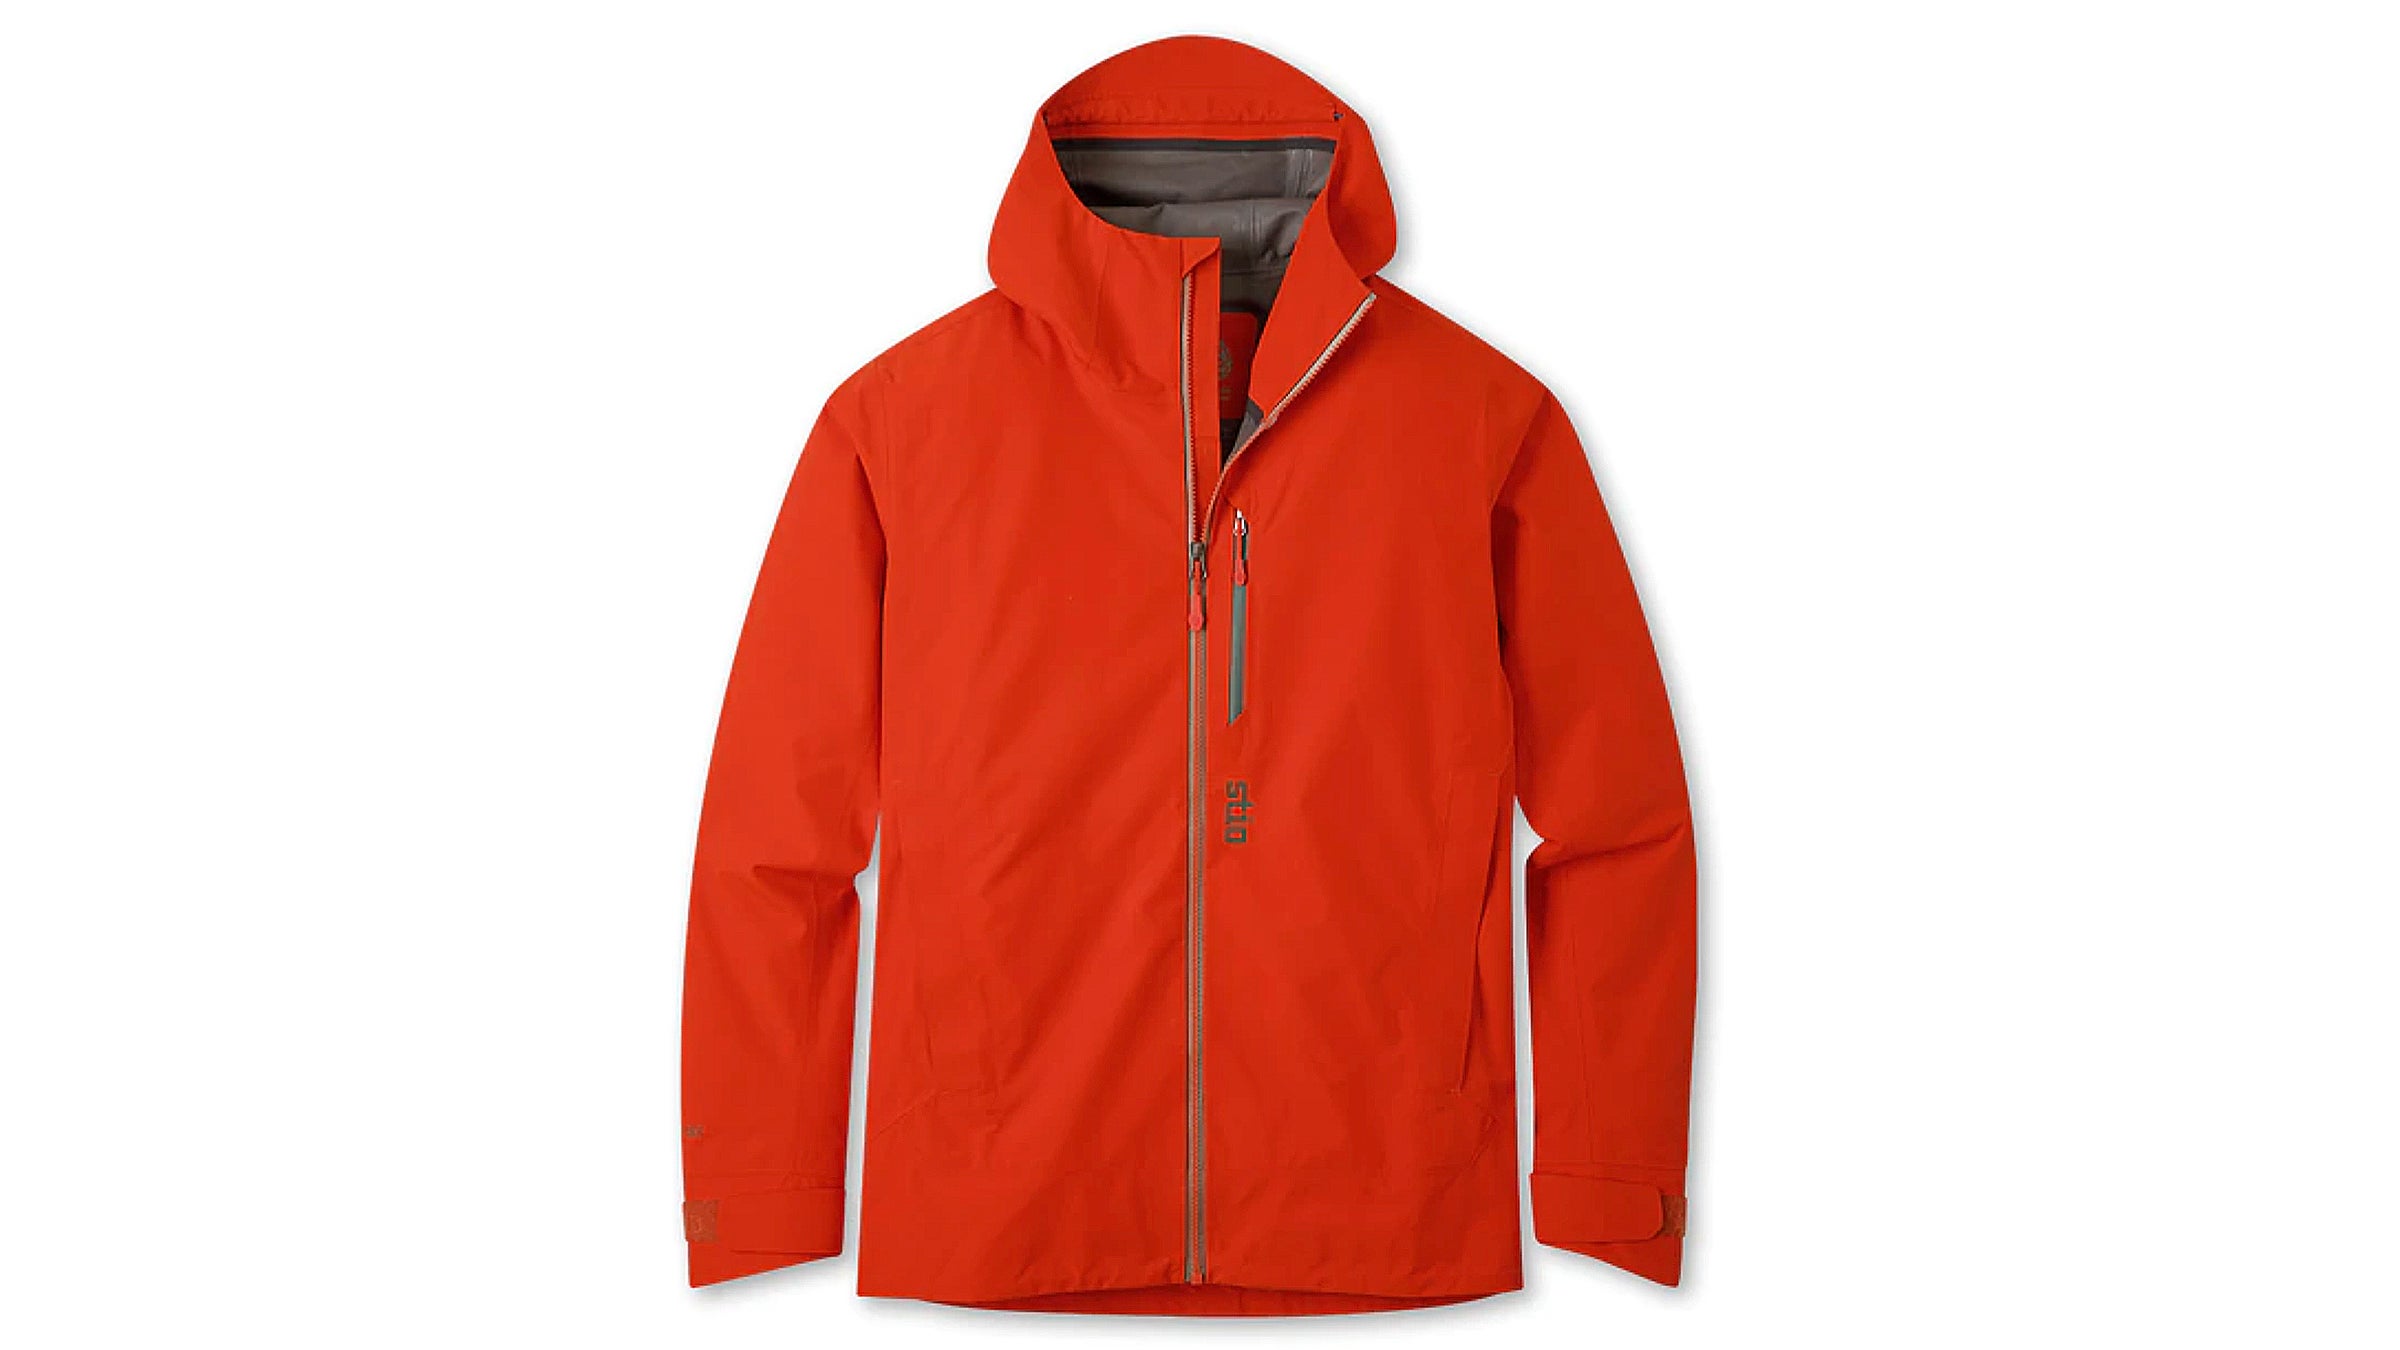 Factory Direct Raincoat - Stay Dry And Covered For Hiking, Fishing,  Festivals